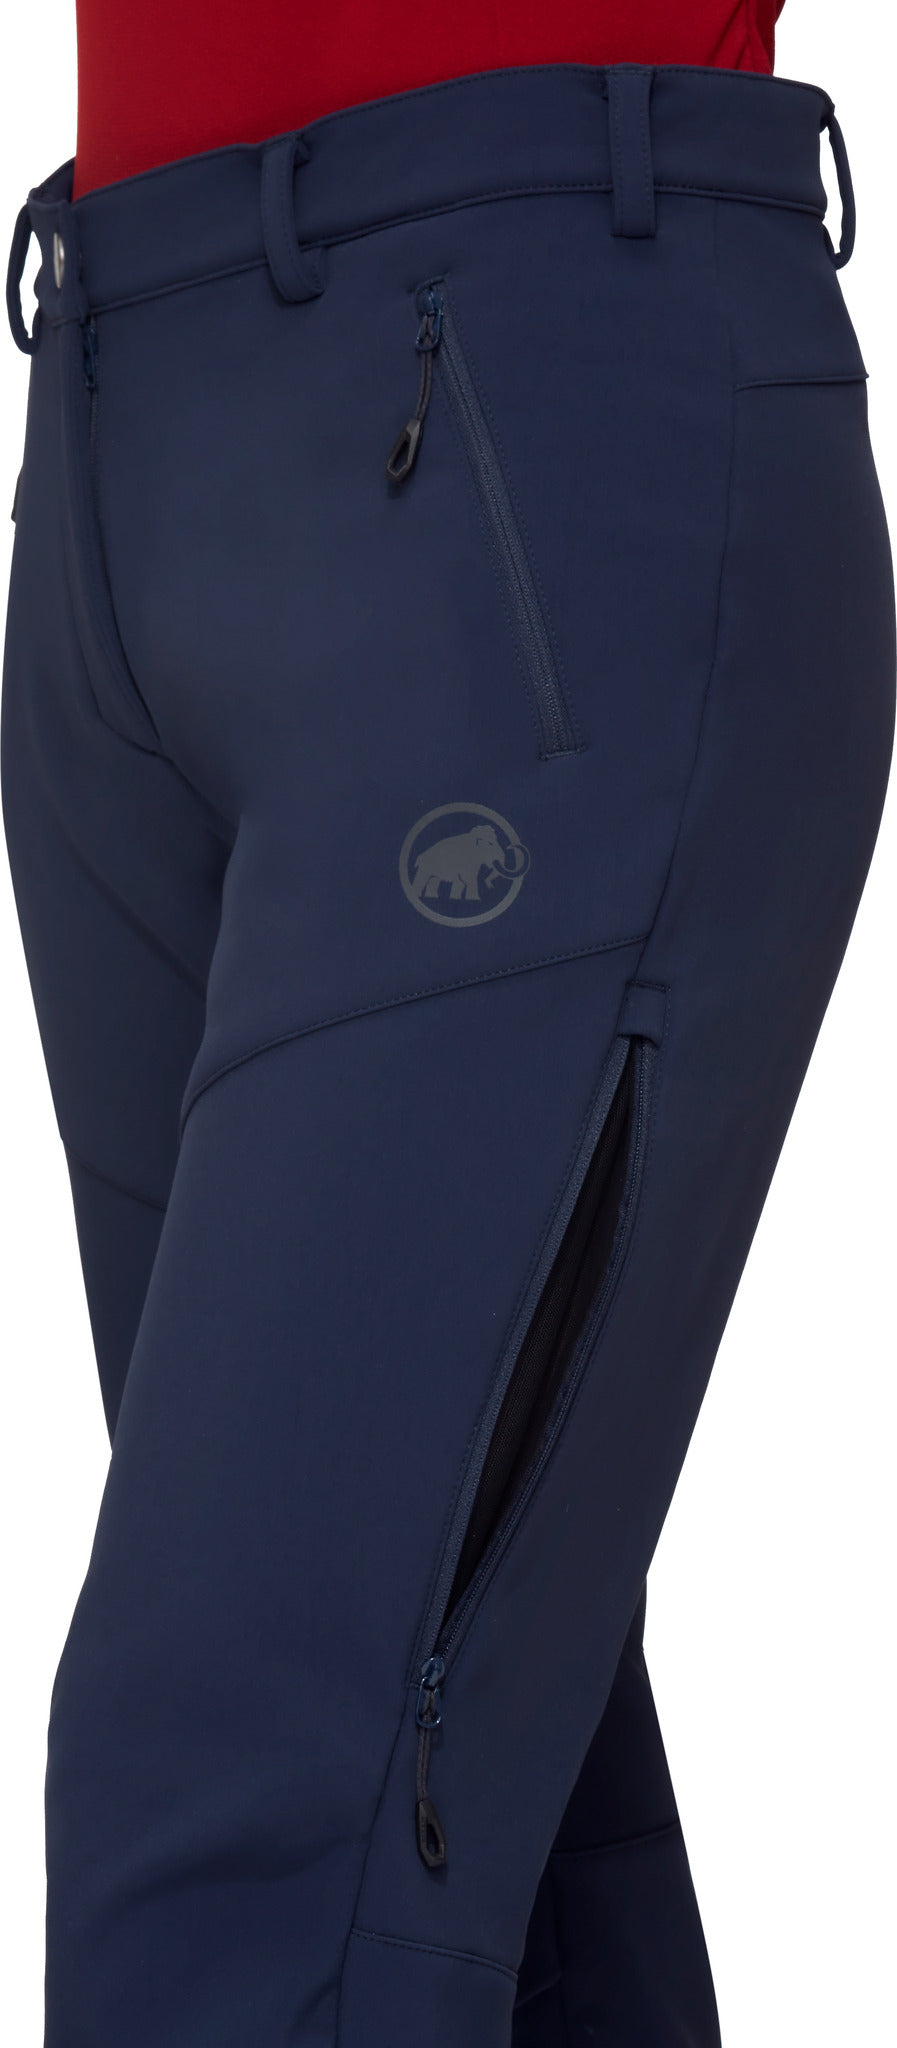 Buy Mammut Winter Hiking Pants Women (1021-00320) marine from £129.99  (Today) – Best Deals on